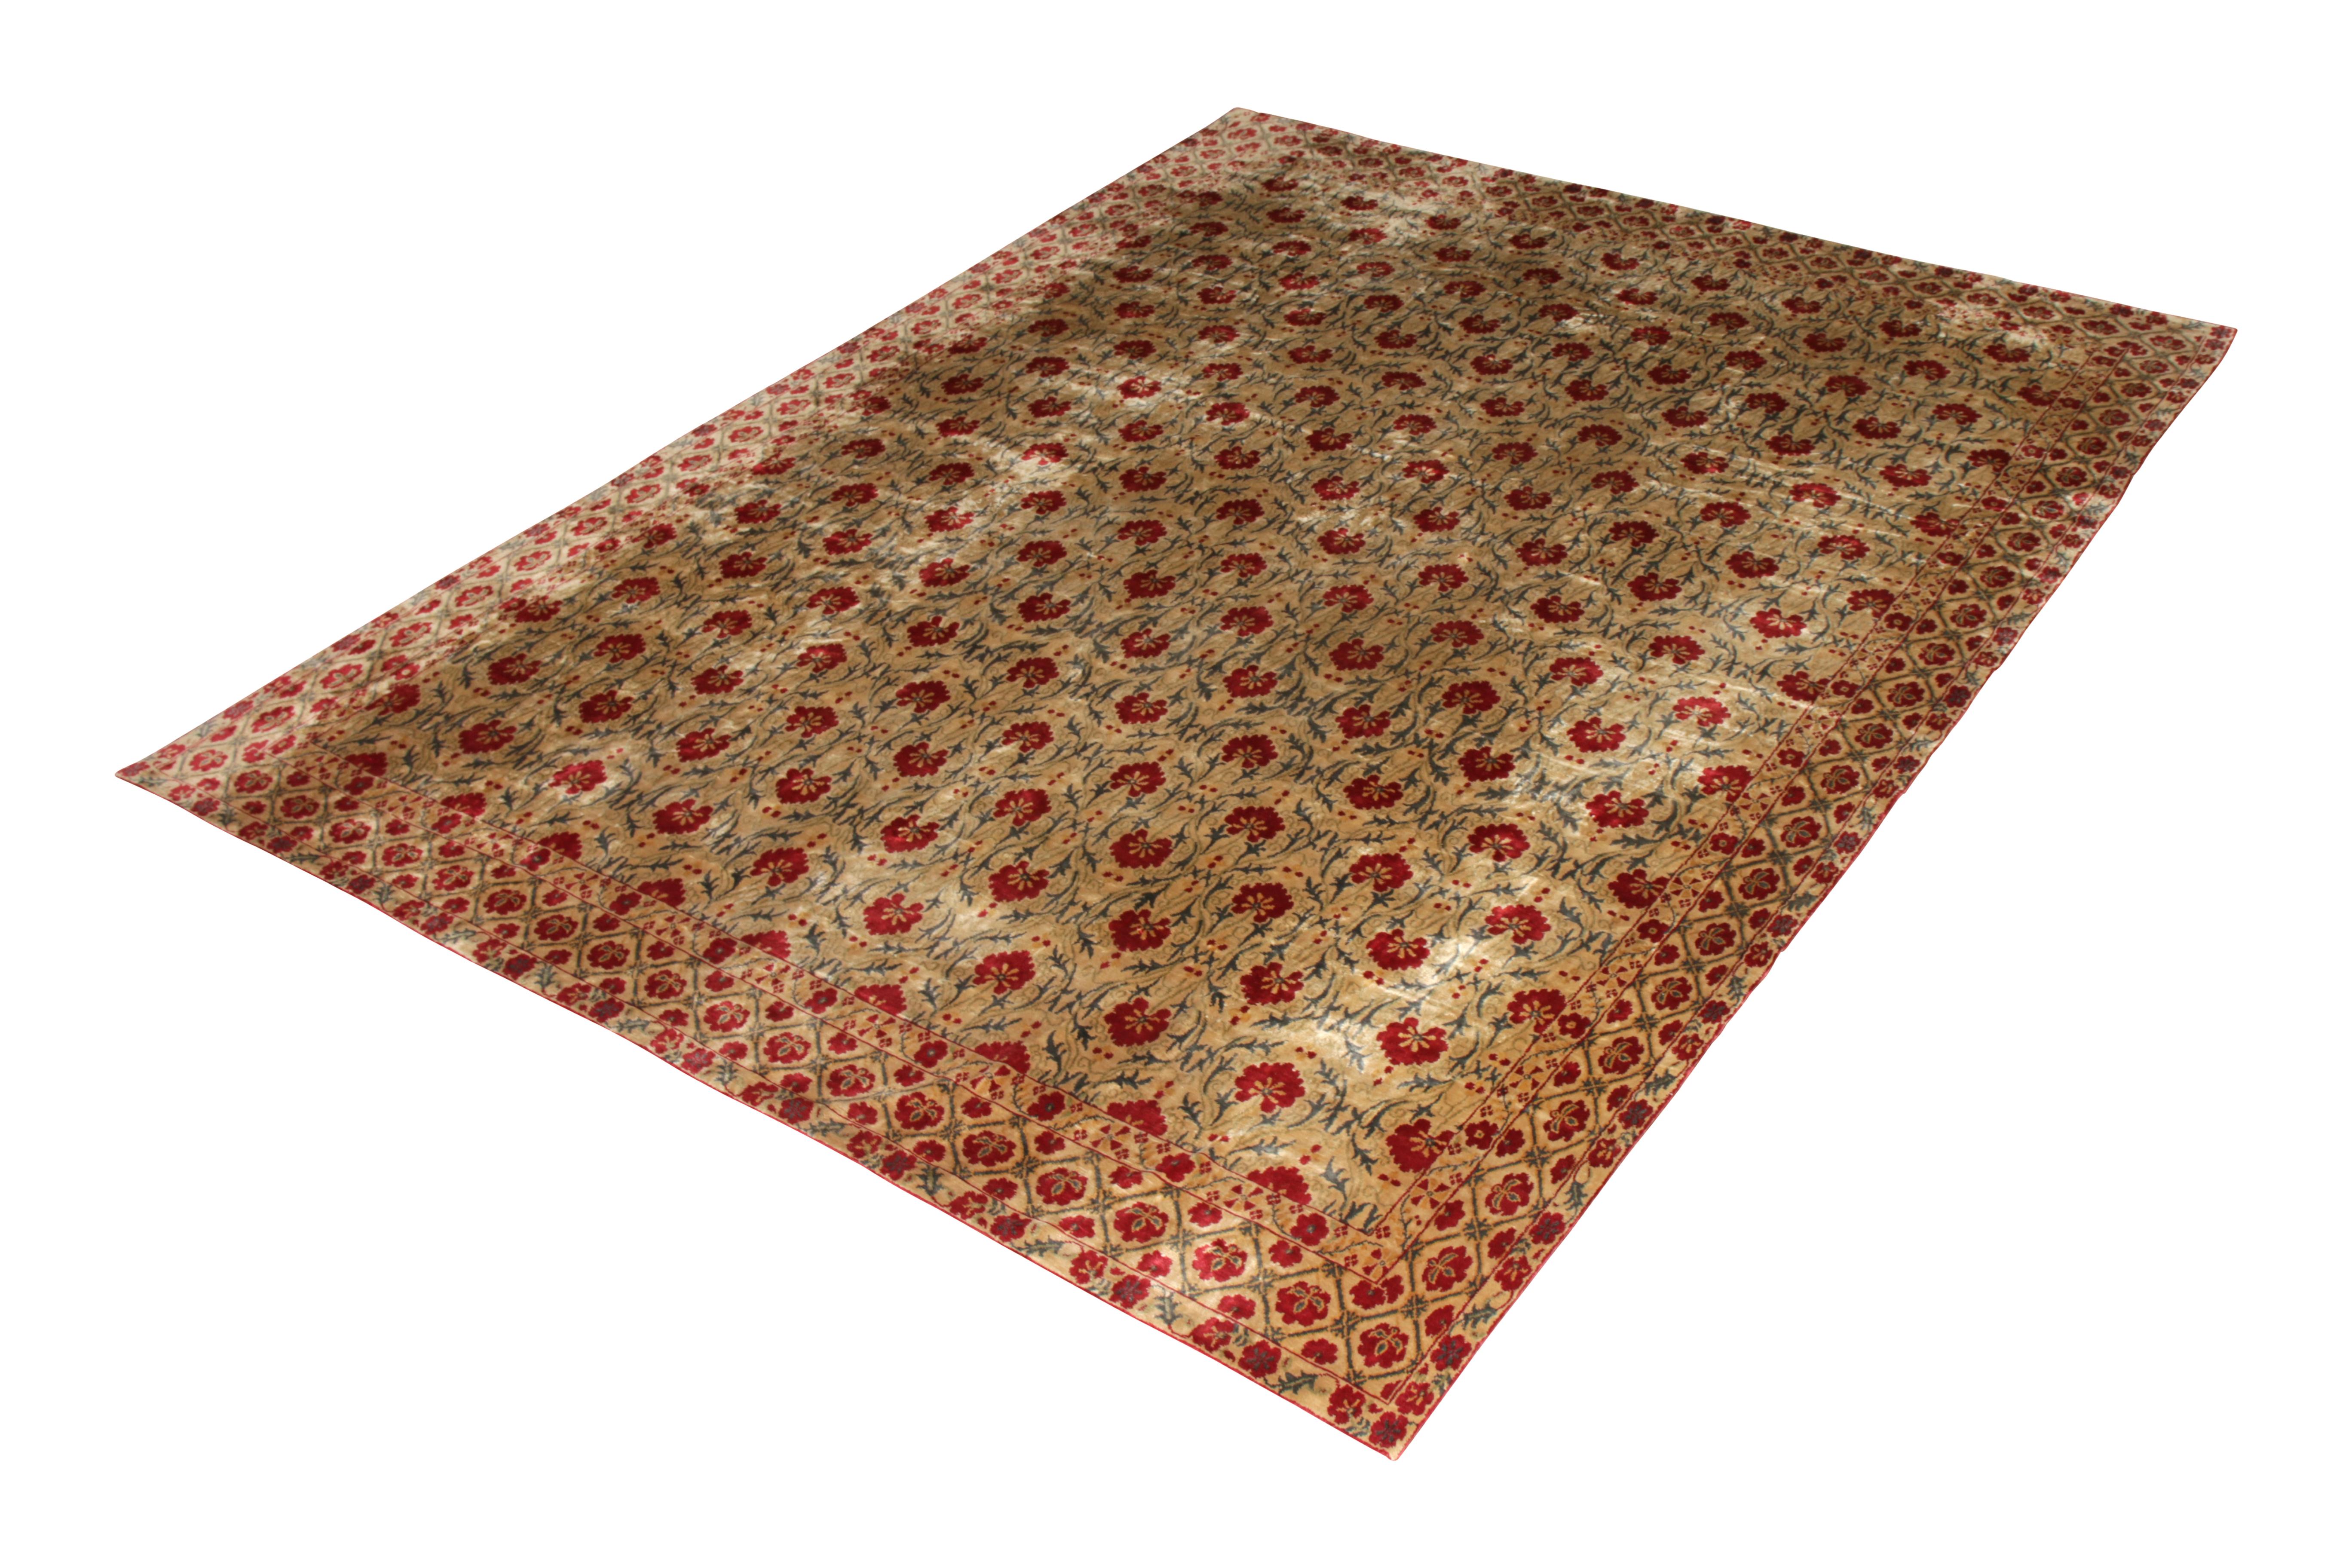 Recently introduced, this new Samarkand style floral rug by Rug & Kilim is hand knotted with a lustrous silk. The rug’s detailed patterns produce an air of happiness in a room with a colorful pattern in red-and-yellow flowers with green leaves and